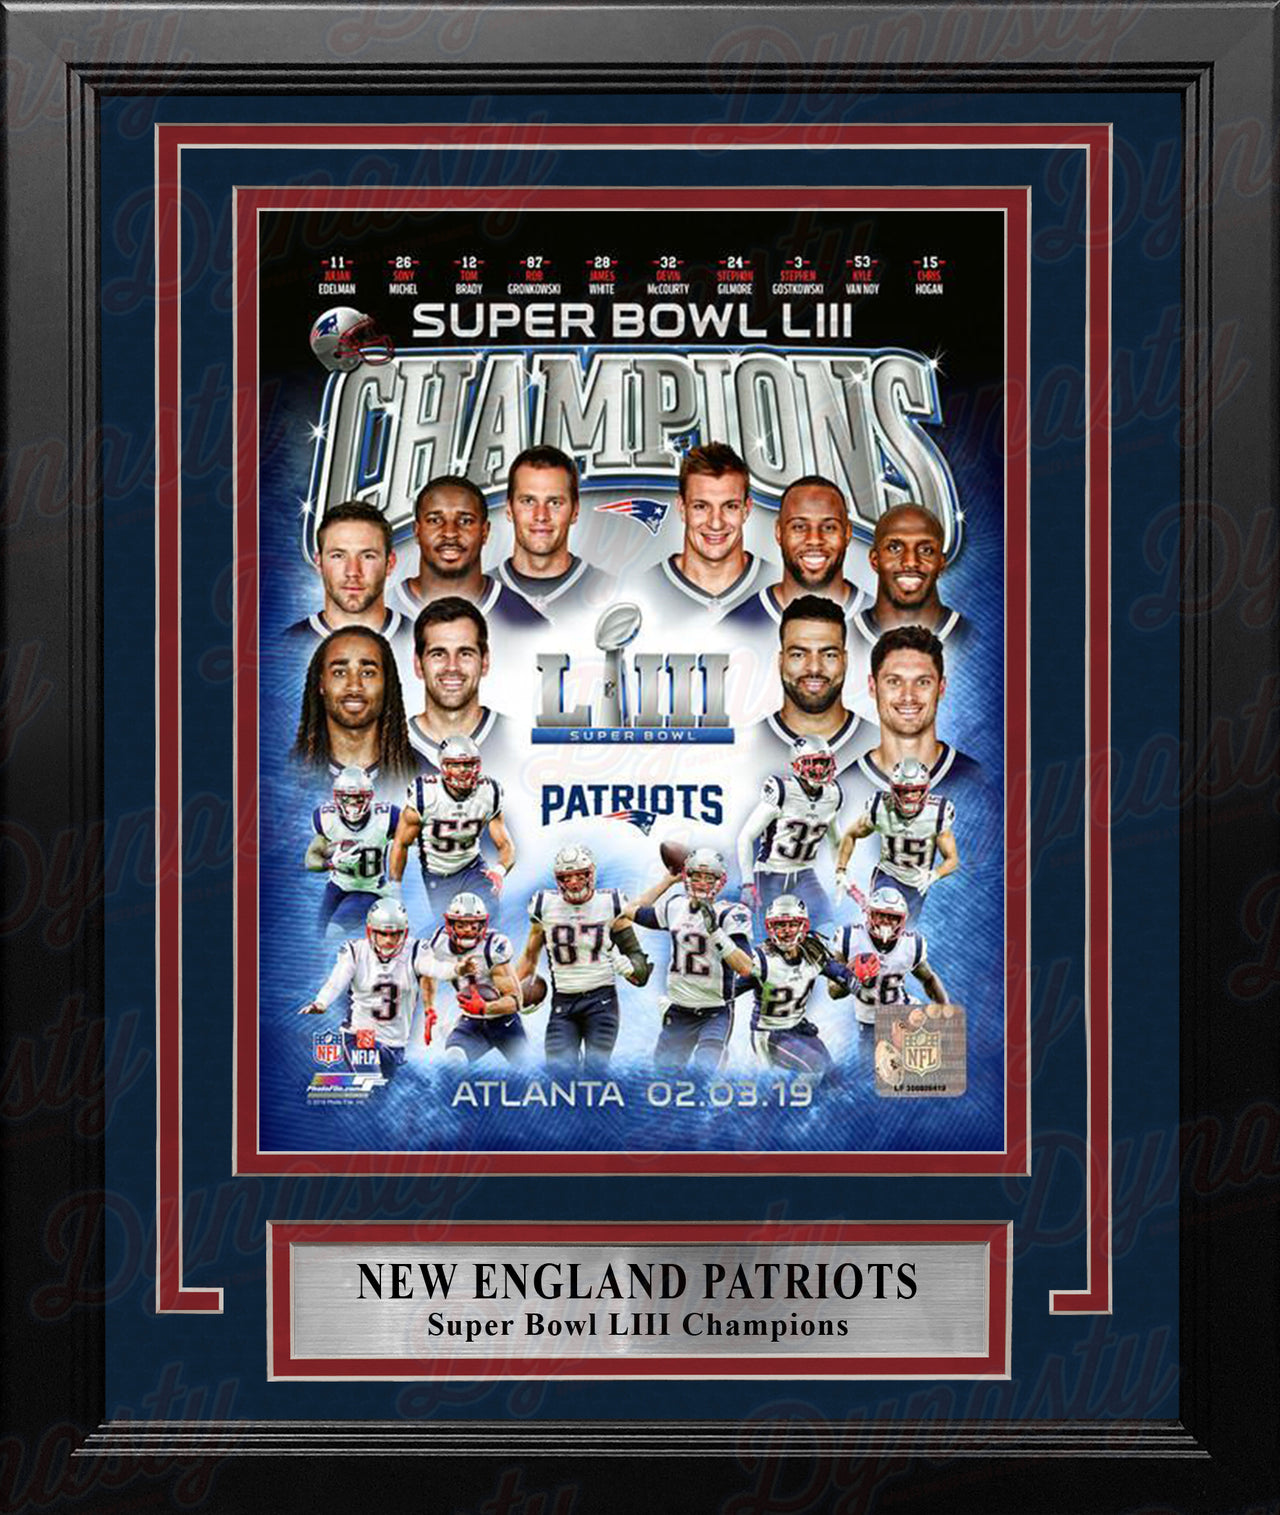 New England Patriots Super Bowl LIII Champions Collage NFL Football 8" x 10" Framed Photo - Dynasty Sports & Framing 